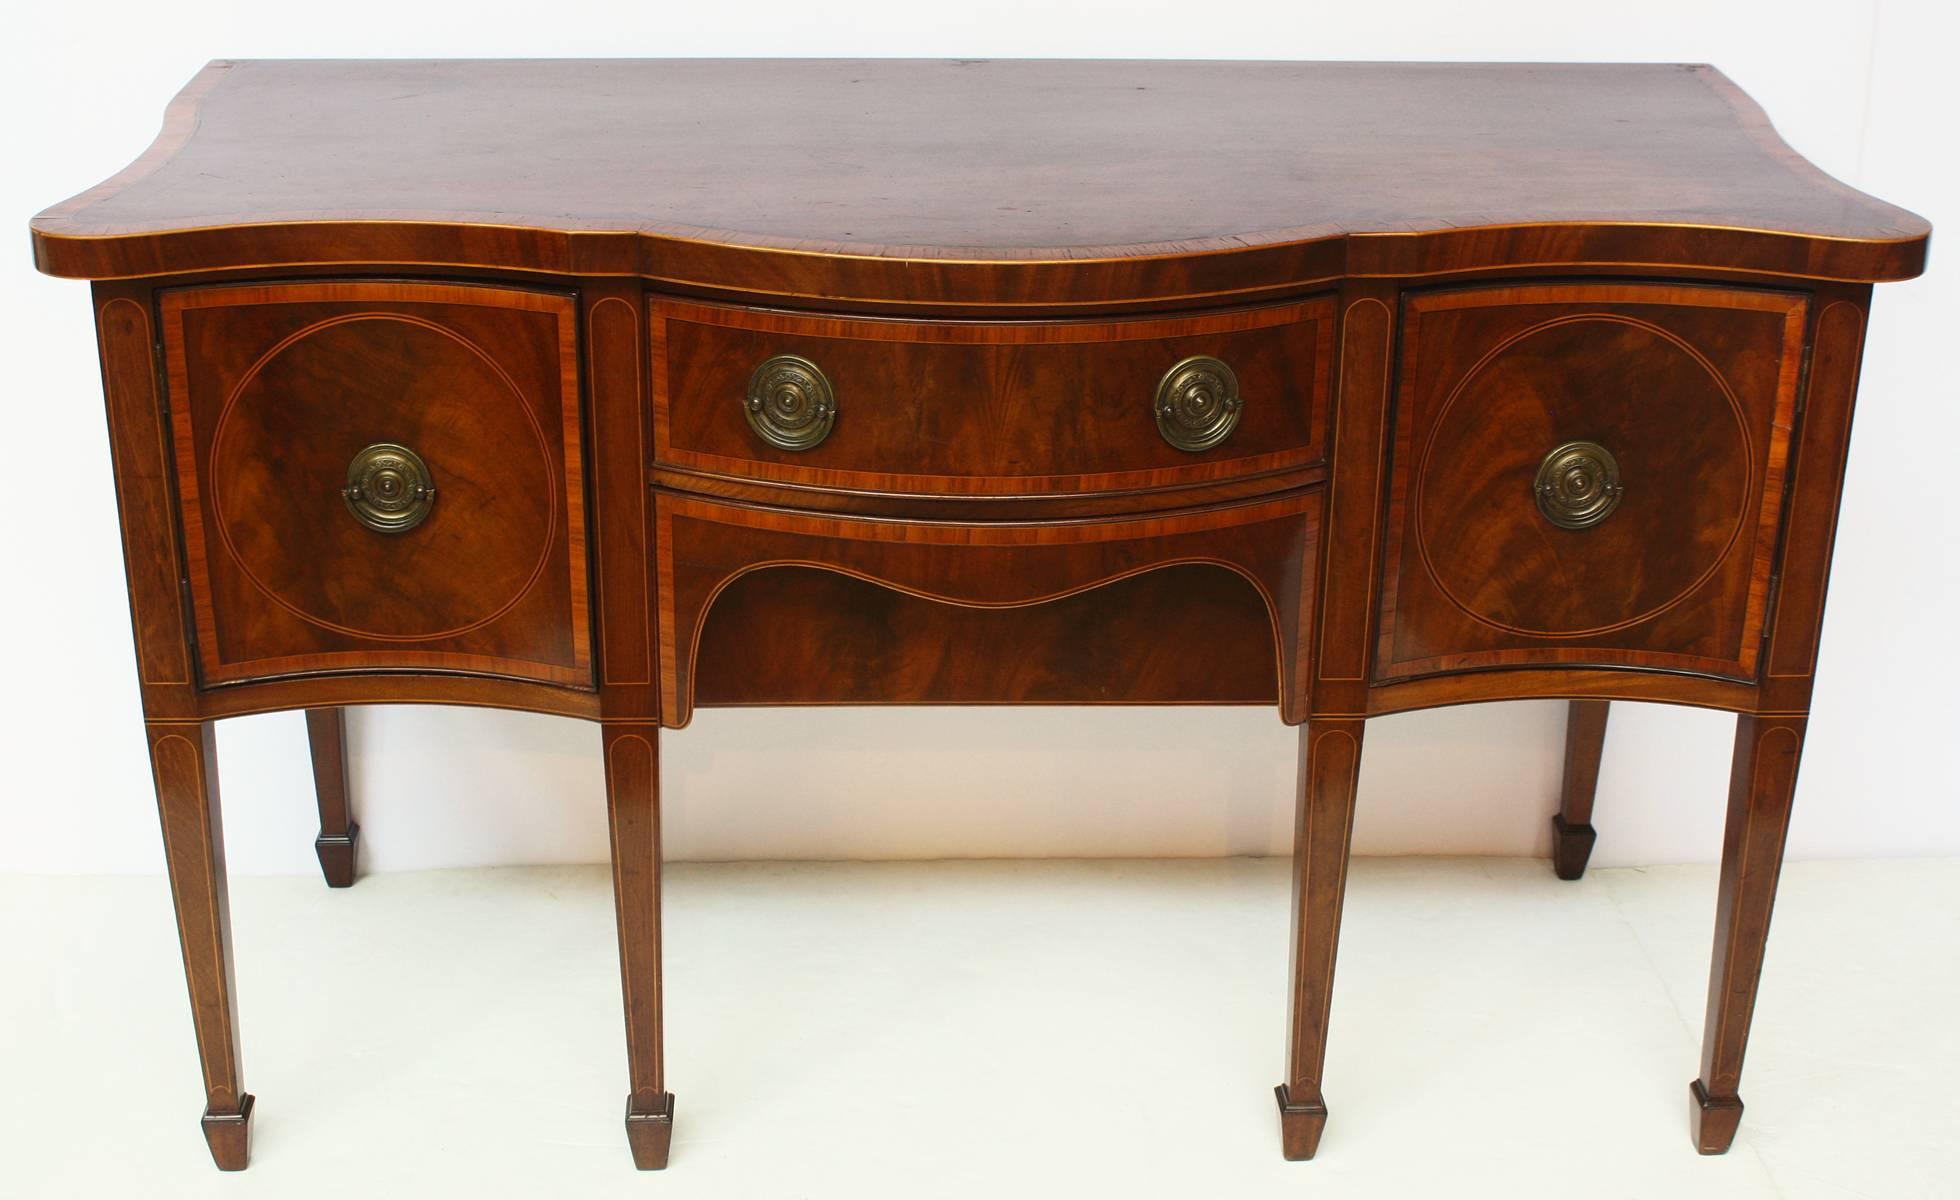 An English George III period mahogany sideboard inlaid in ebony and satinwood, with a bow fronted central drawer flanked by two serpentine fronted hinged doors each containing fitted pull-out trays. All rests on six square tapered legs and spade